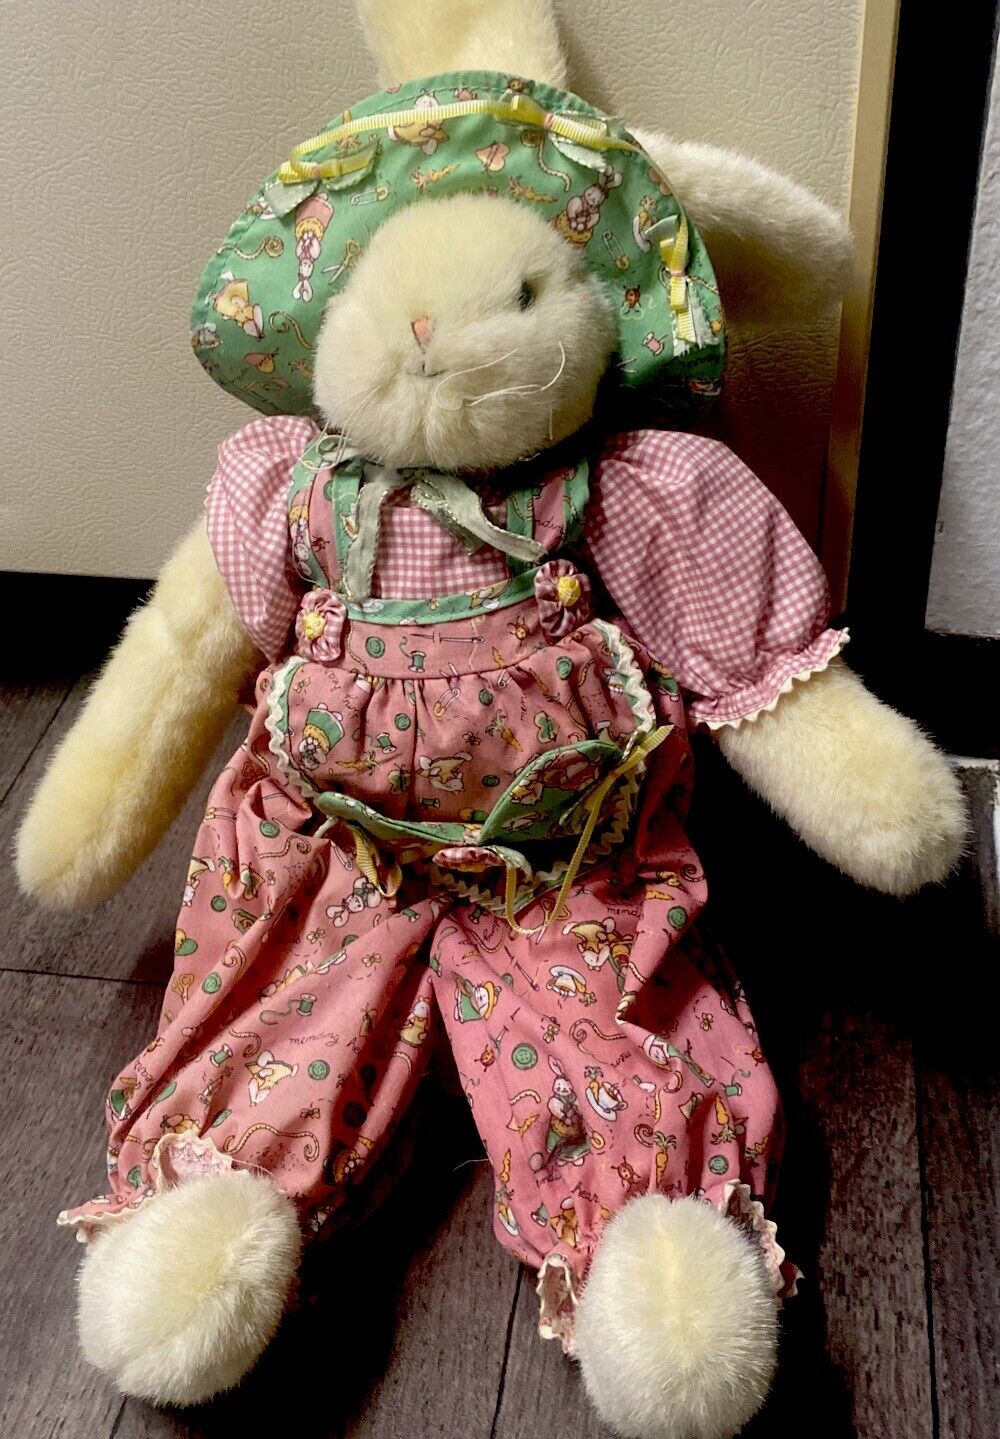 Bunnies By The Bay  Plush Little Bit 16” Tall  Original Hallmark Retired Clothed